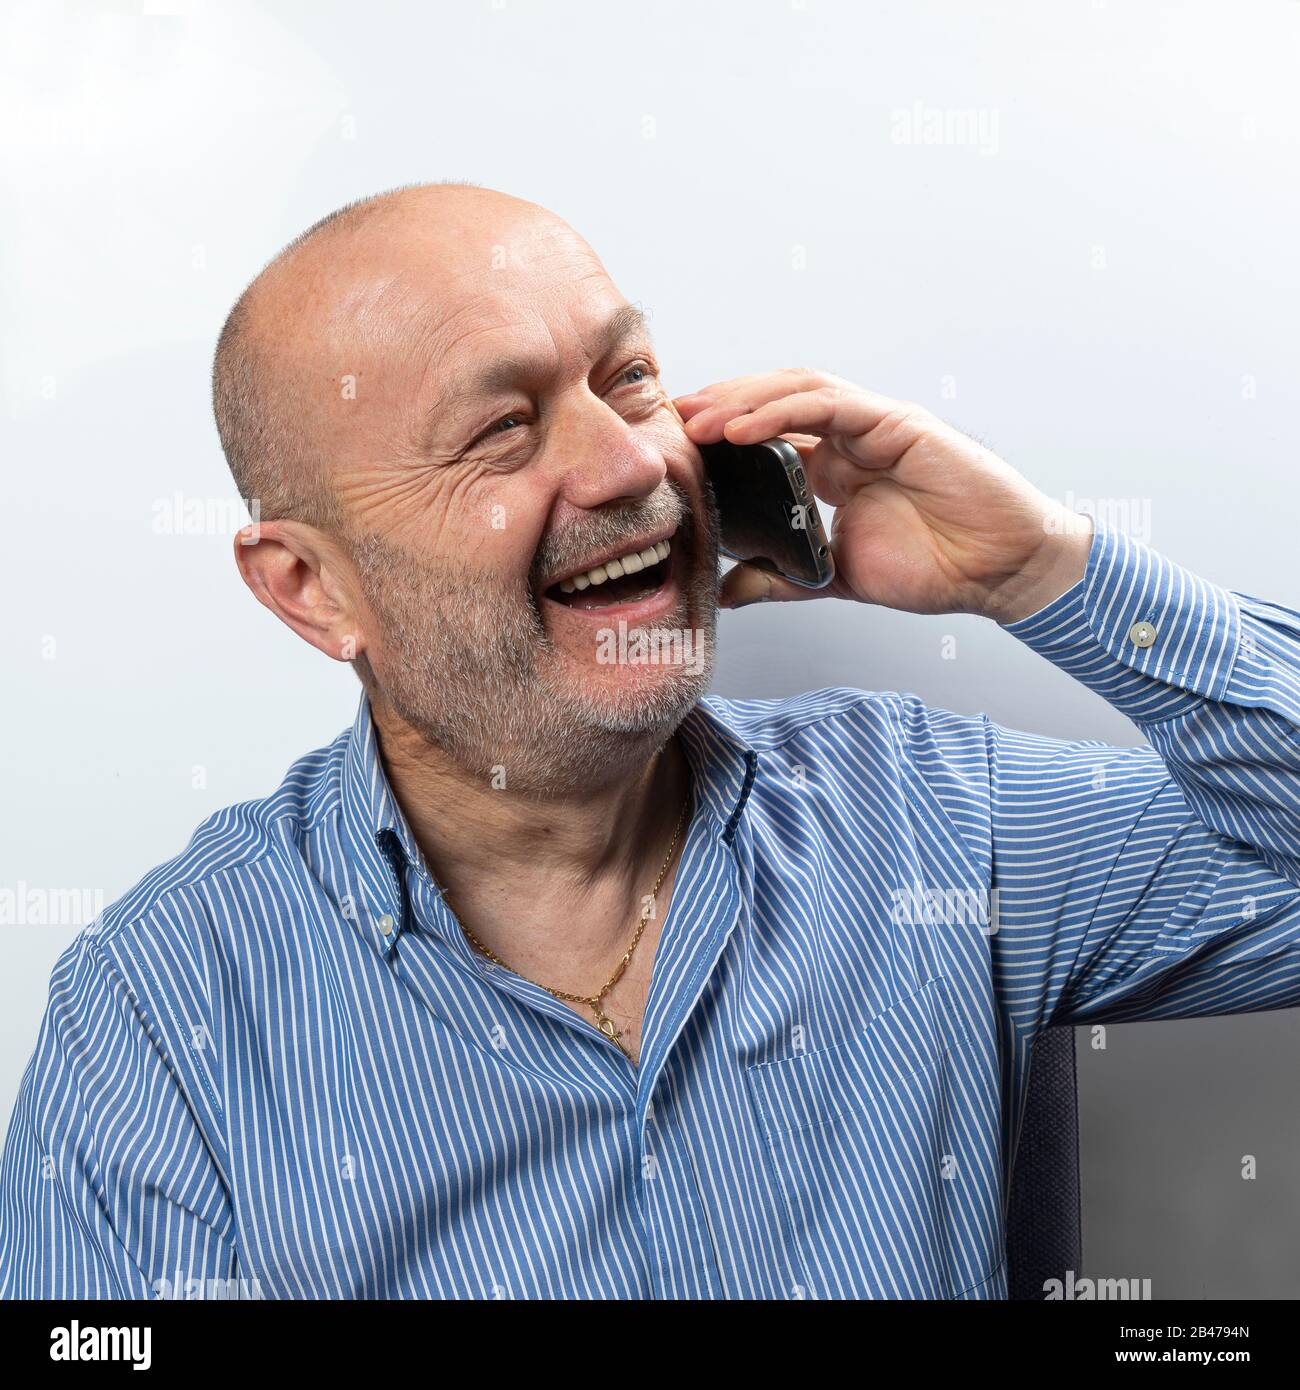 A middle-aged man laughs during a cell phone conversation Stock Photo